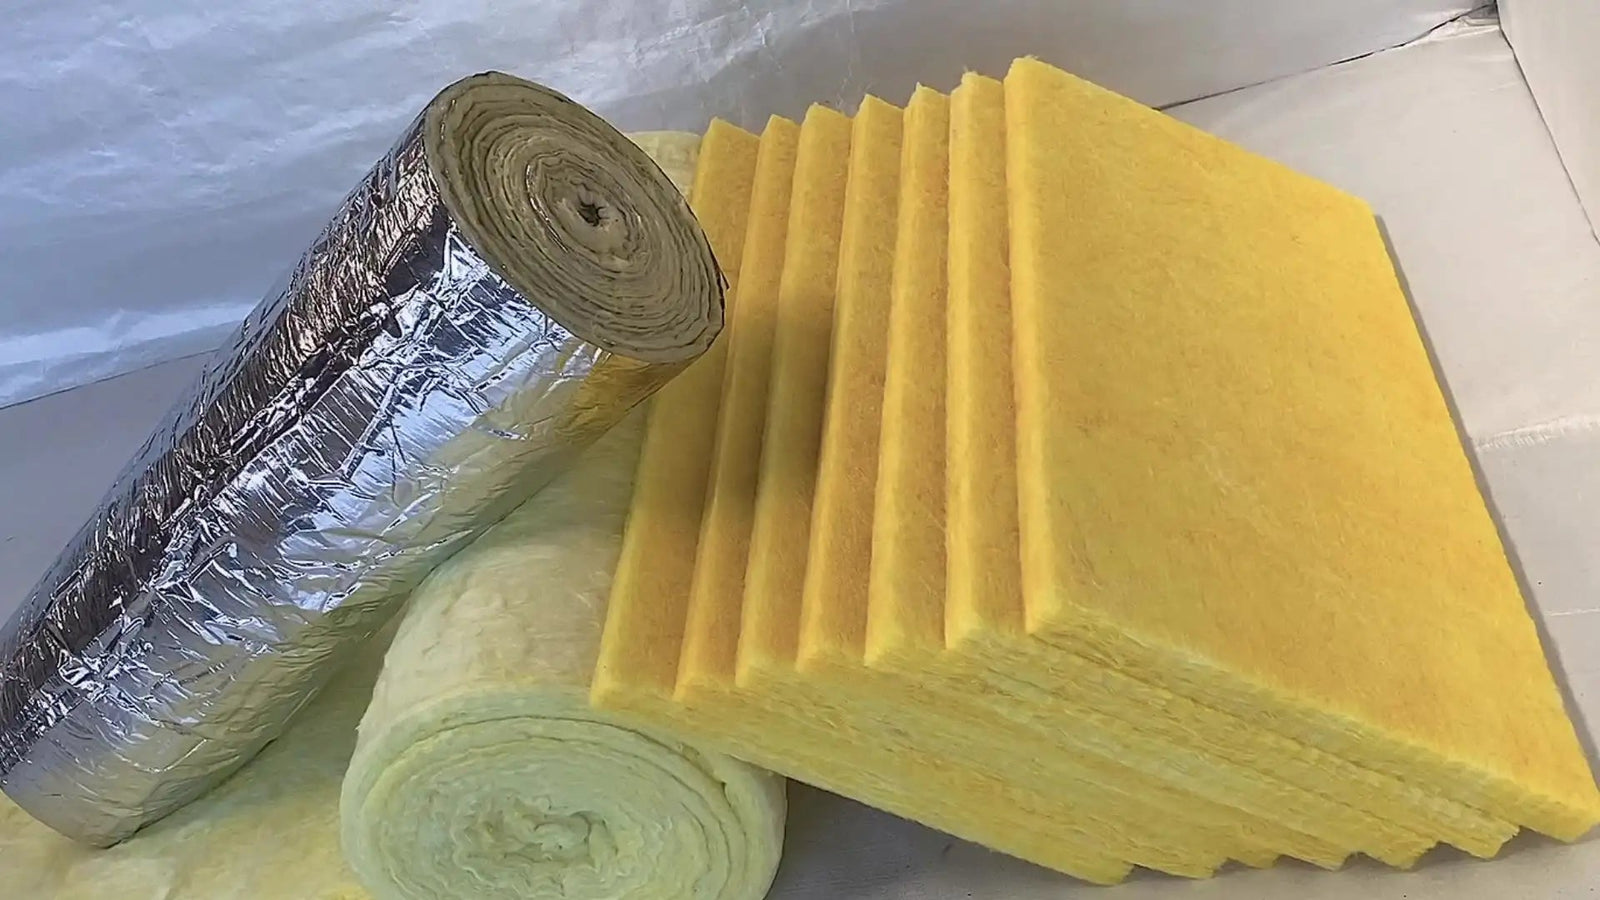 Foil faced roll, plain roll and sheets of fiberglass insulation